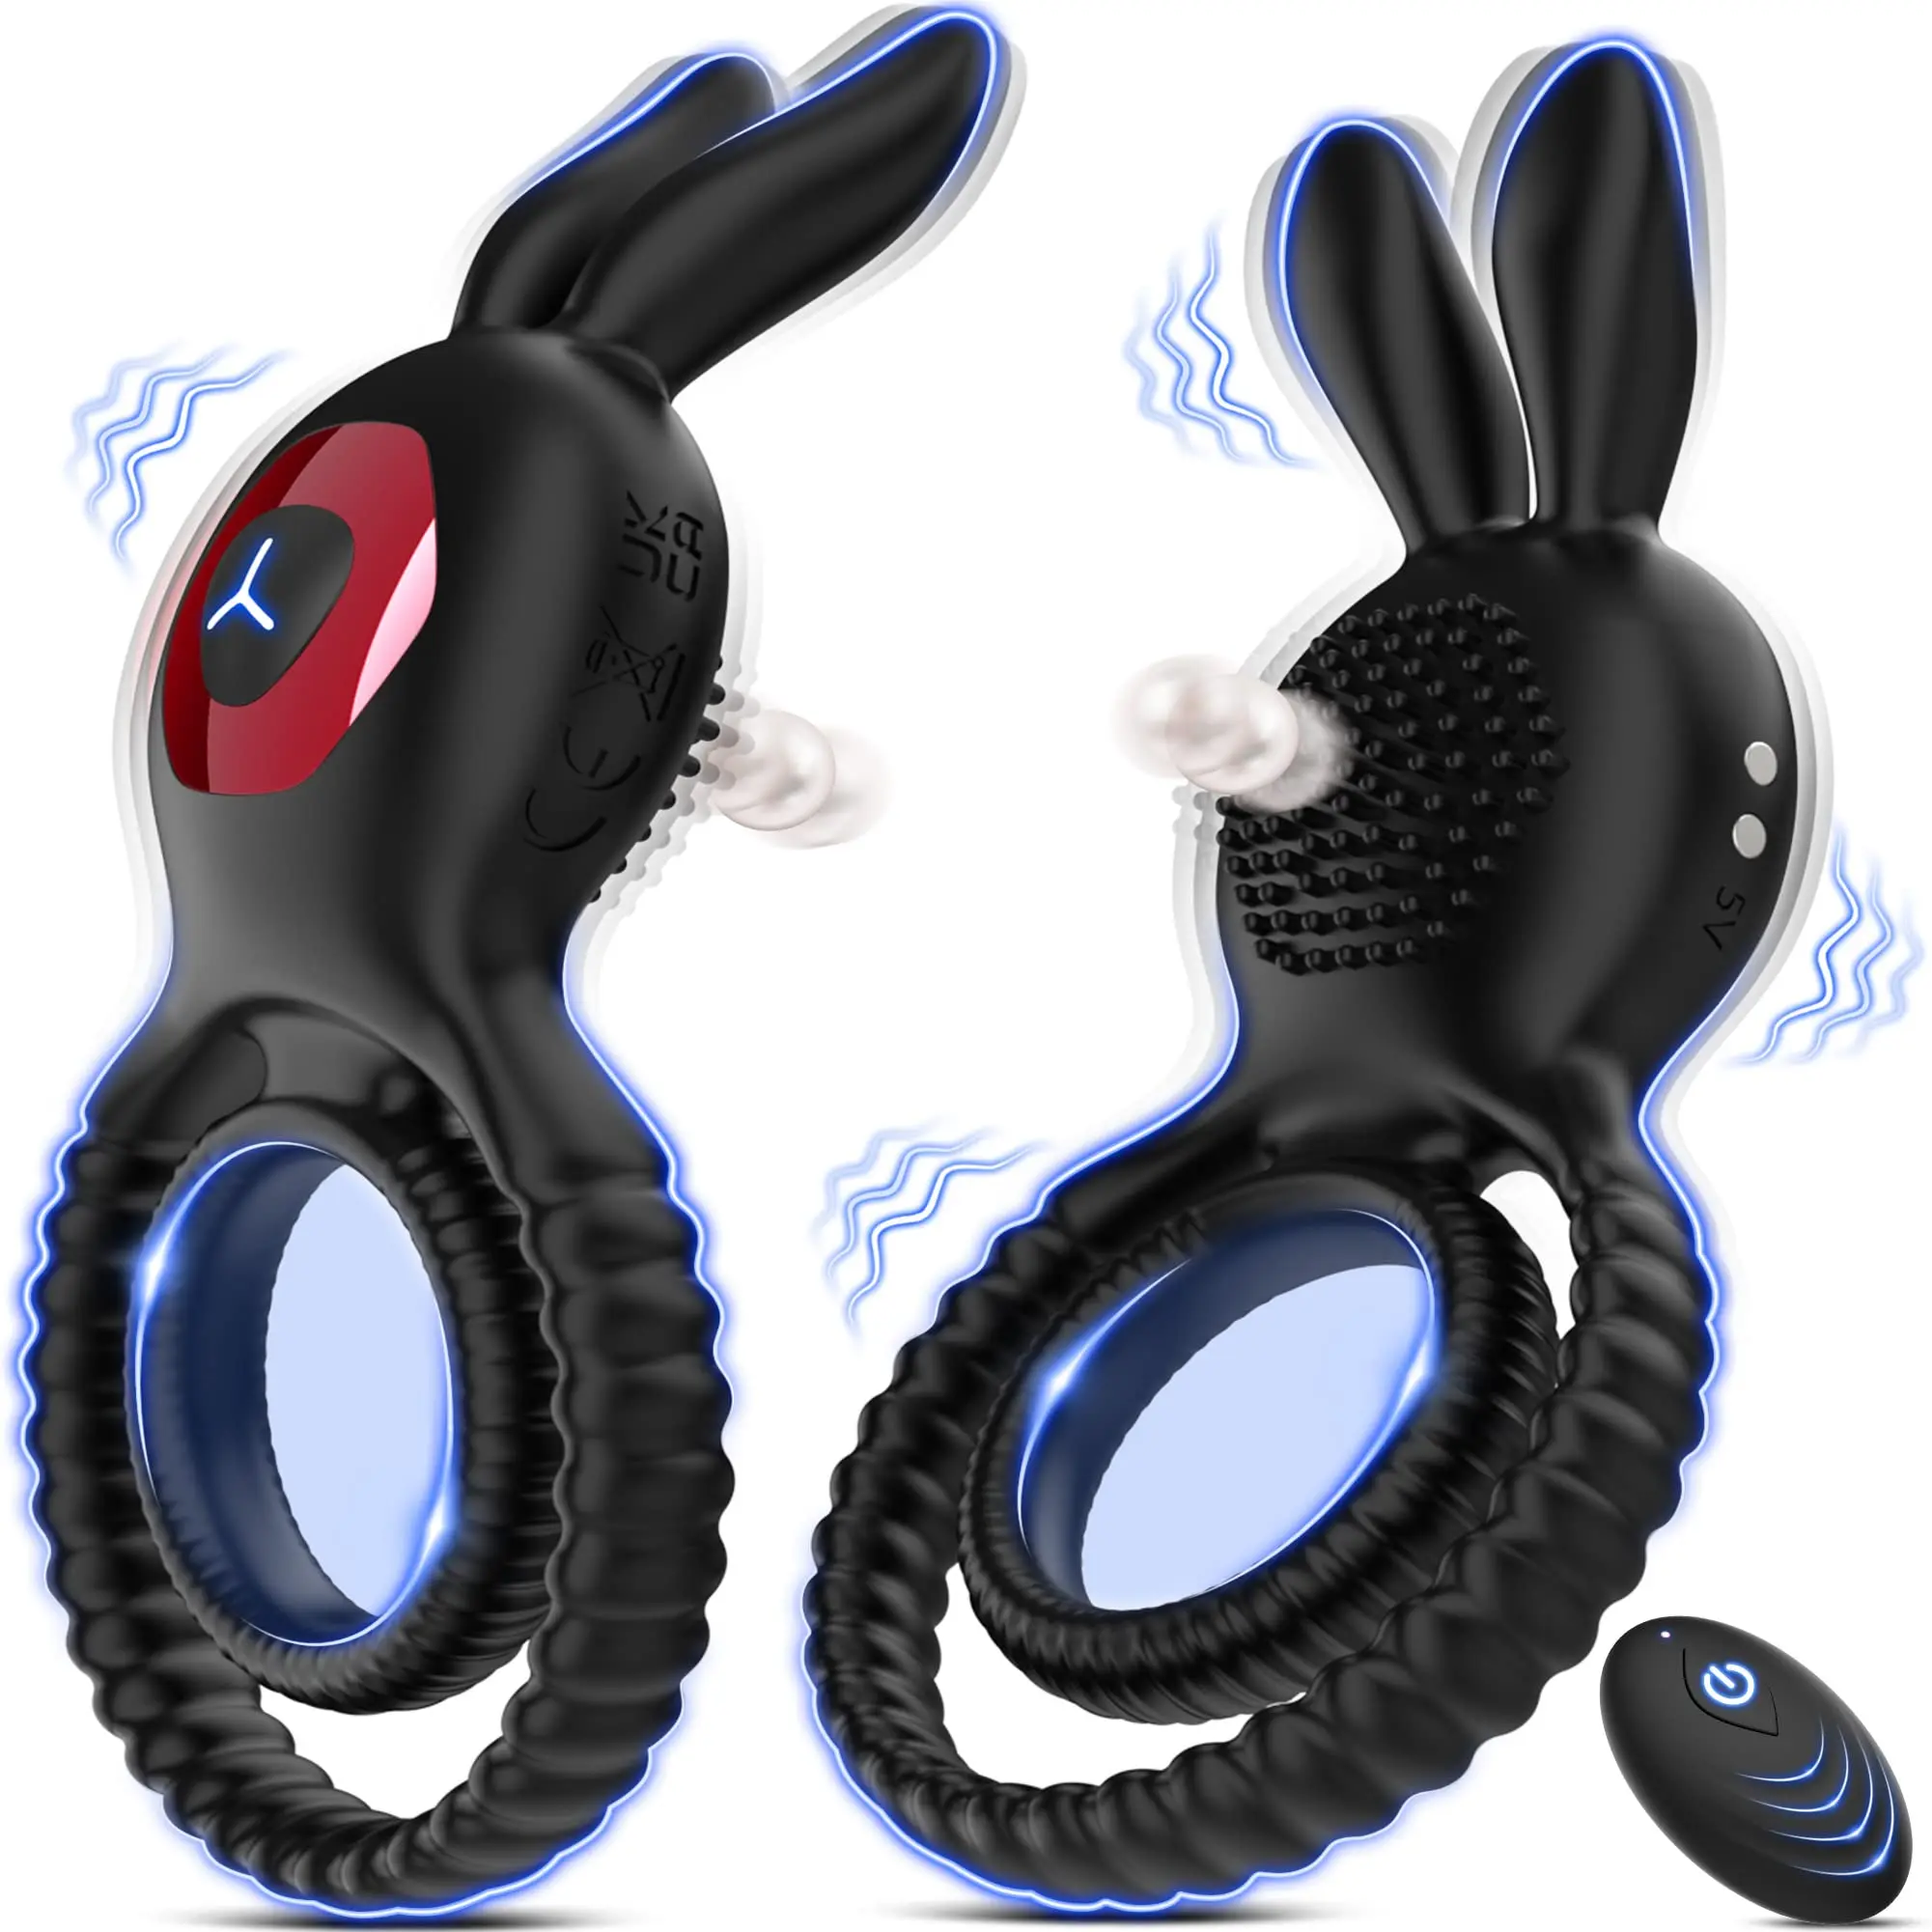 Cock Ring for Men Remote Control Rabbit Dual Vibrating Penis Rings for Ejaculation Delay Testis Stimulation Sex Toy for Couples Sex Toys For Men Sexually Suggestive: No